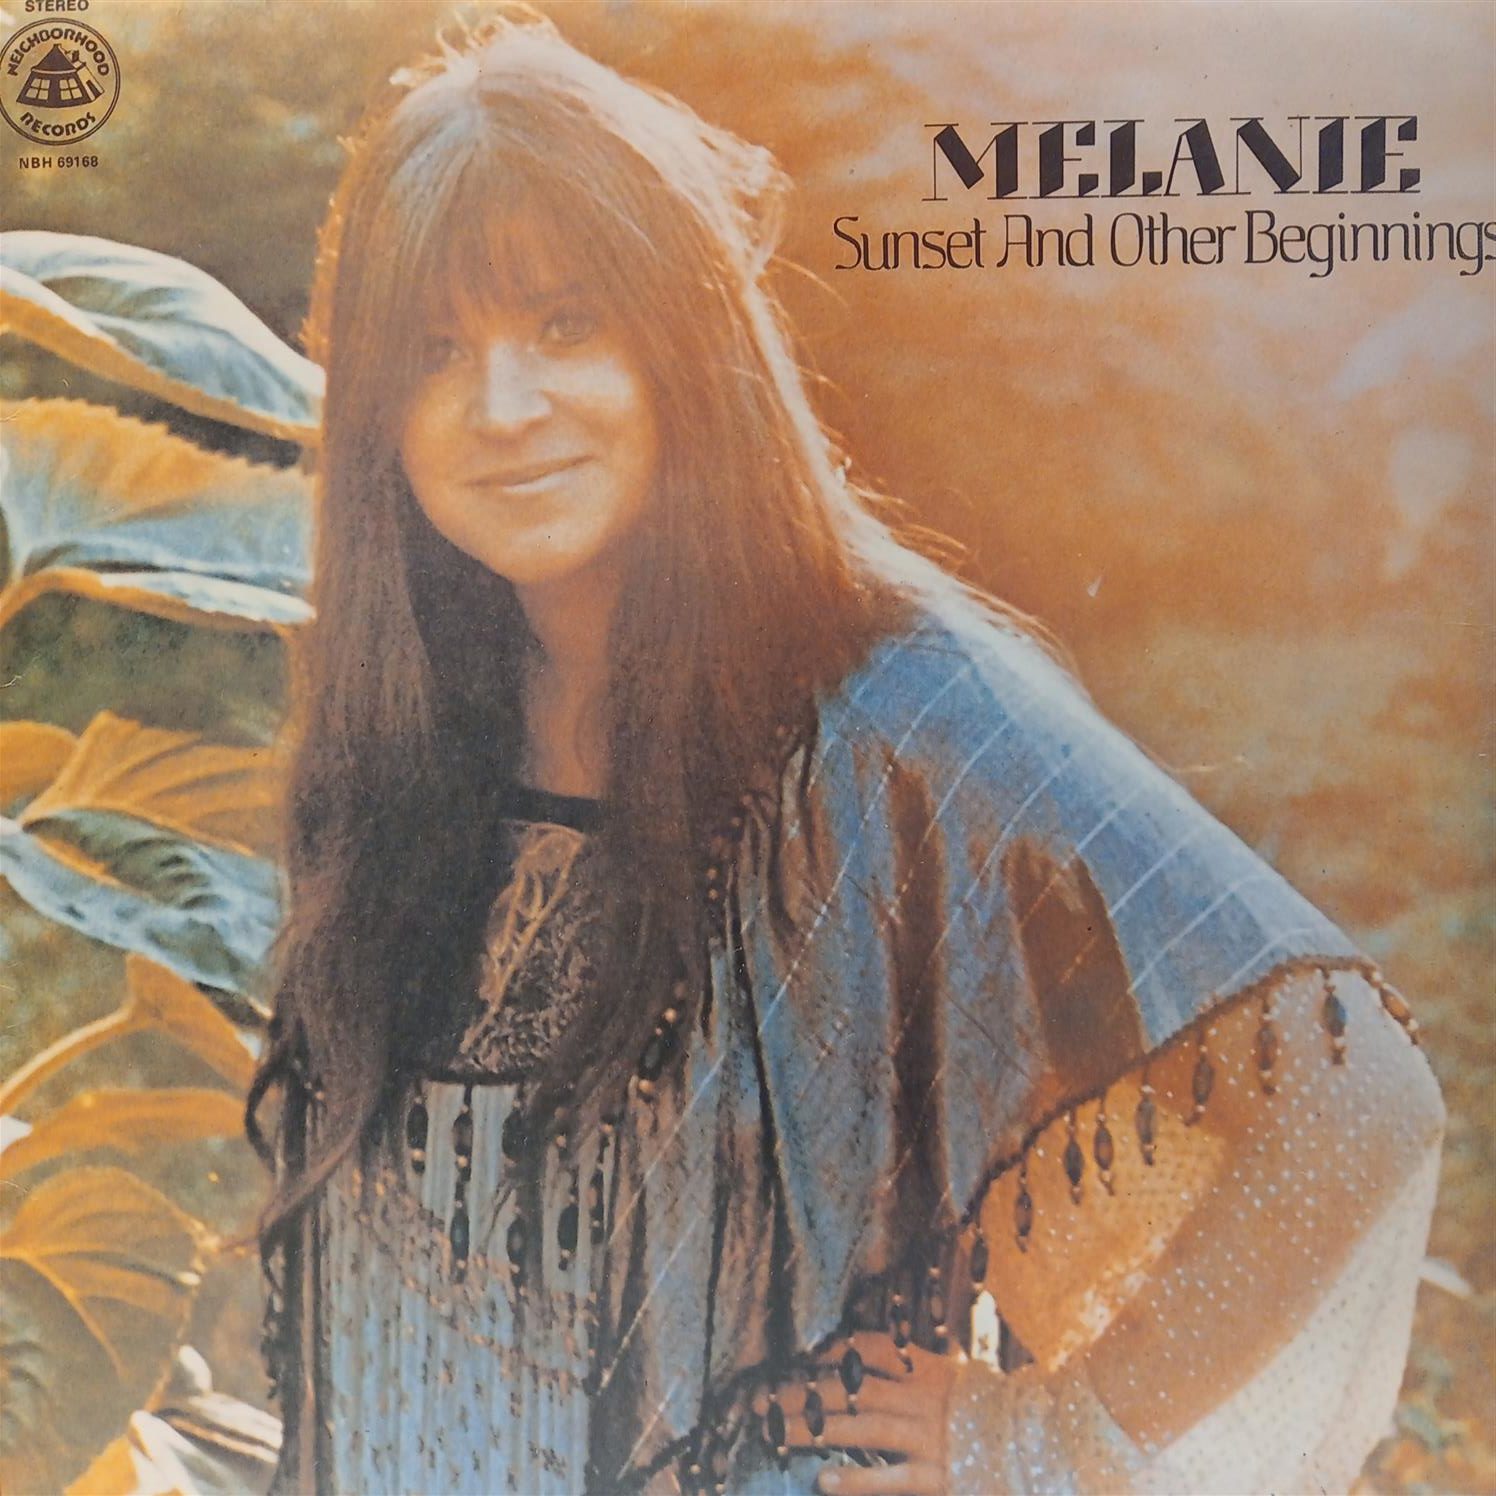 MELANIE – SUNSET AND OTHER BEGINNINGS ON